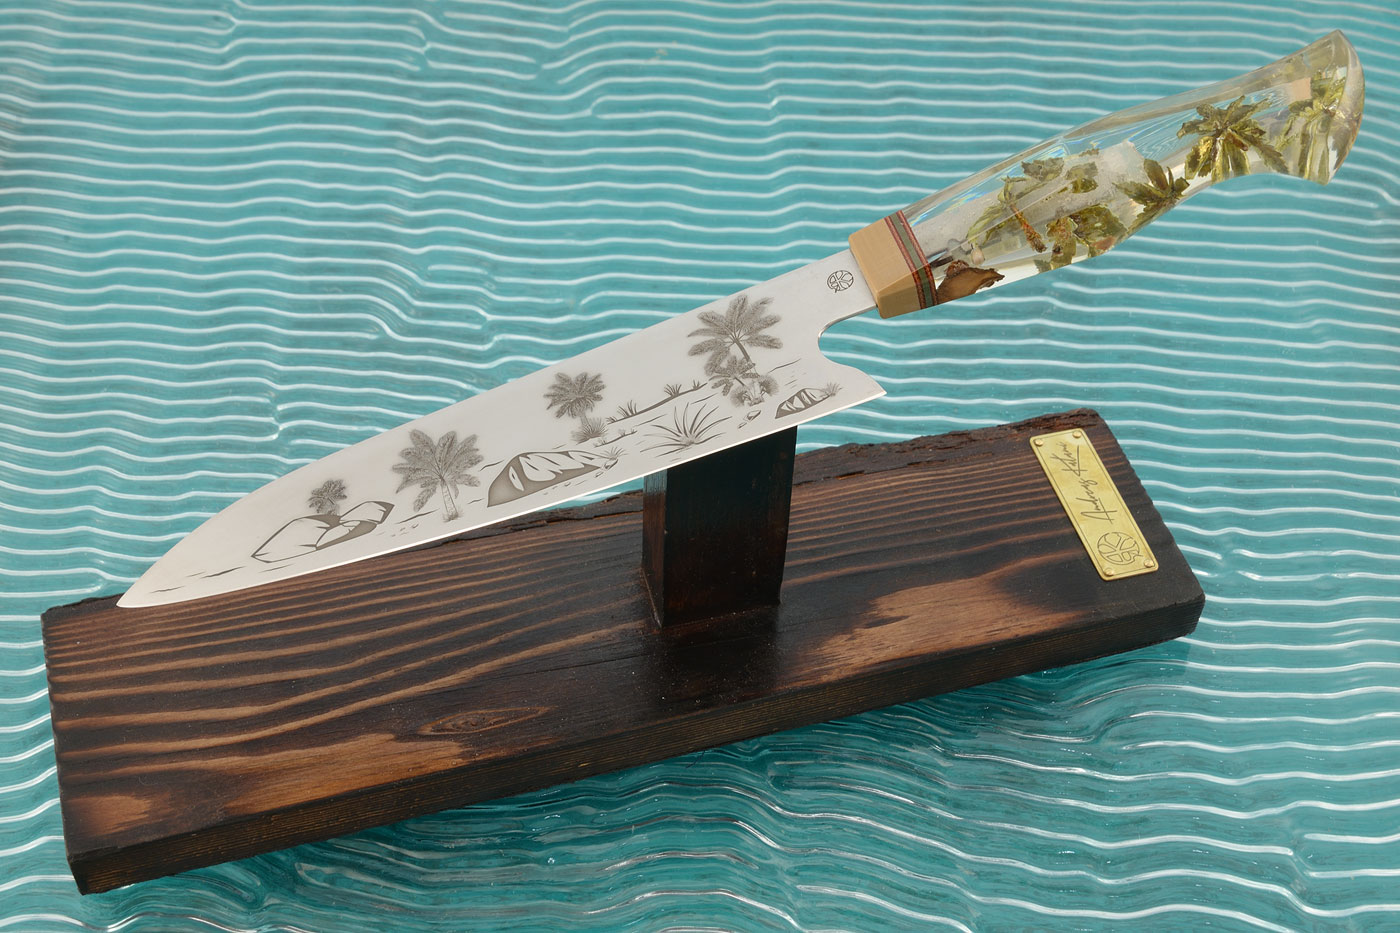 Aslaug Chef's Knife (8-1/4 in.) with Natural Sahara Desert Galaxy